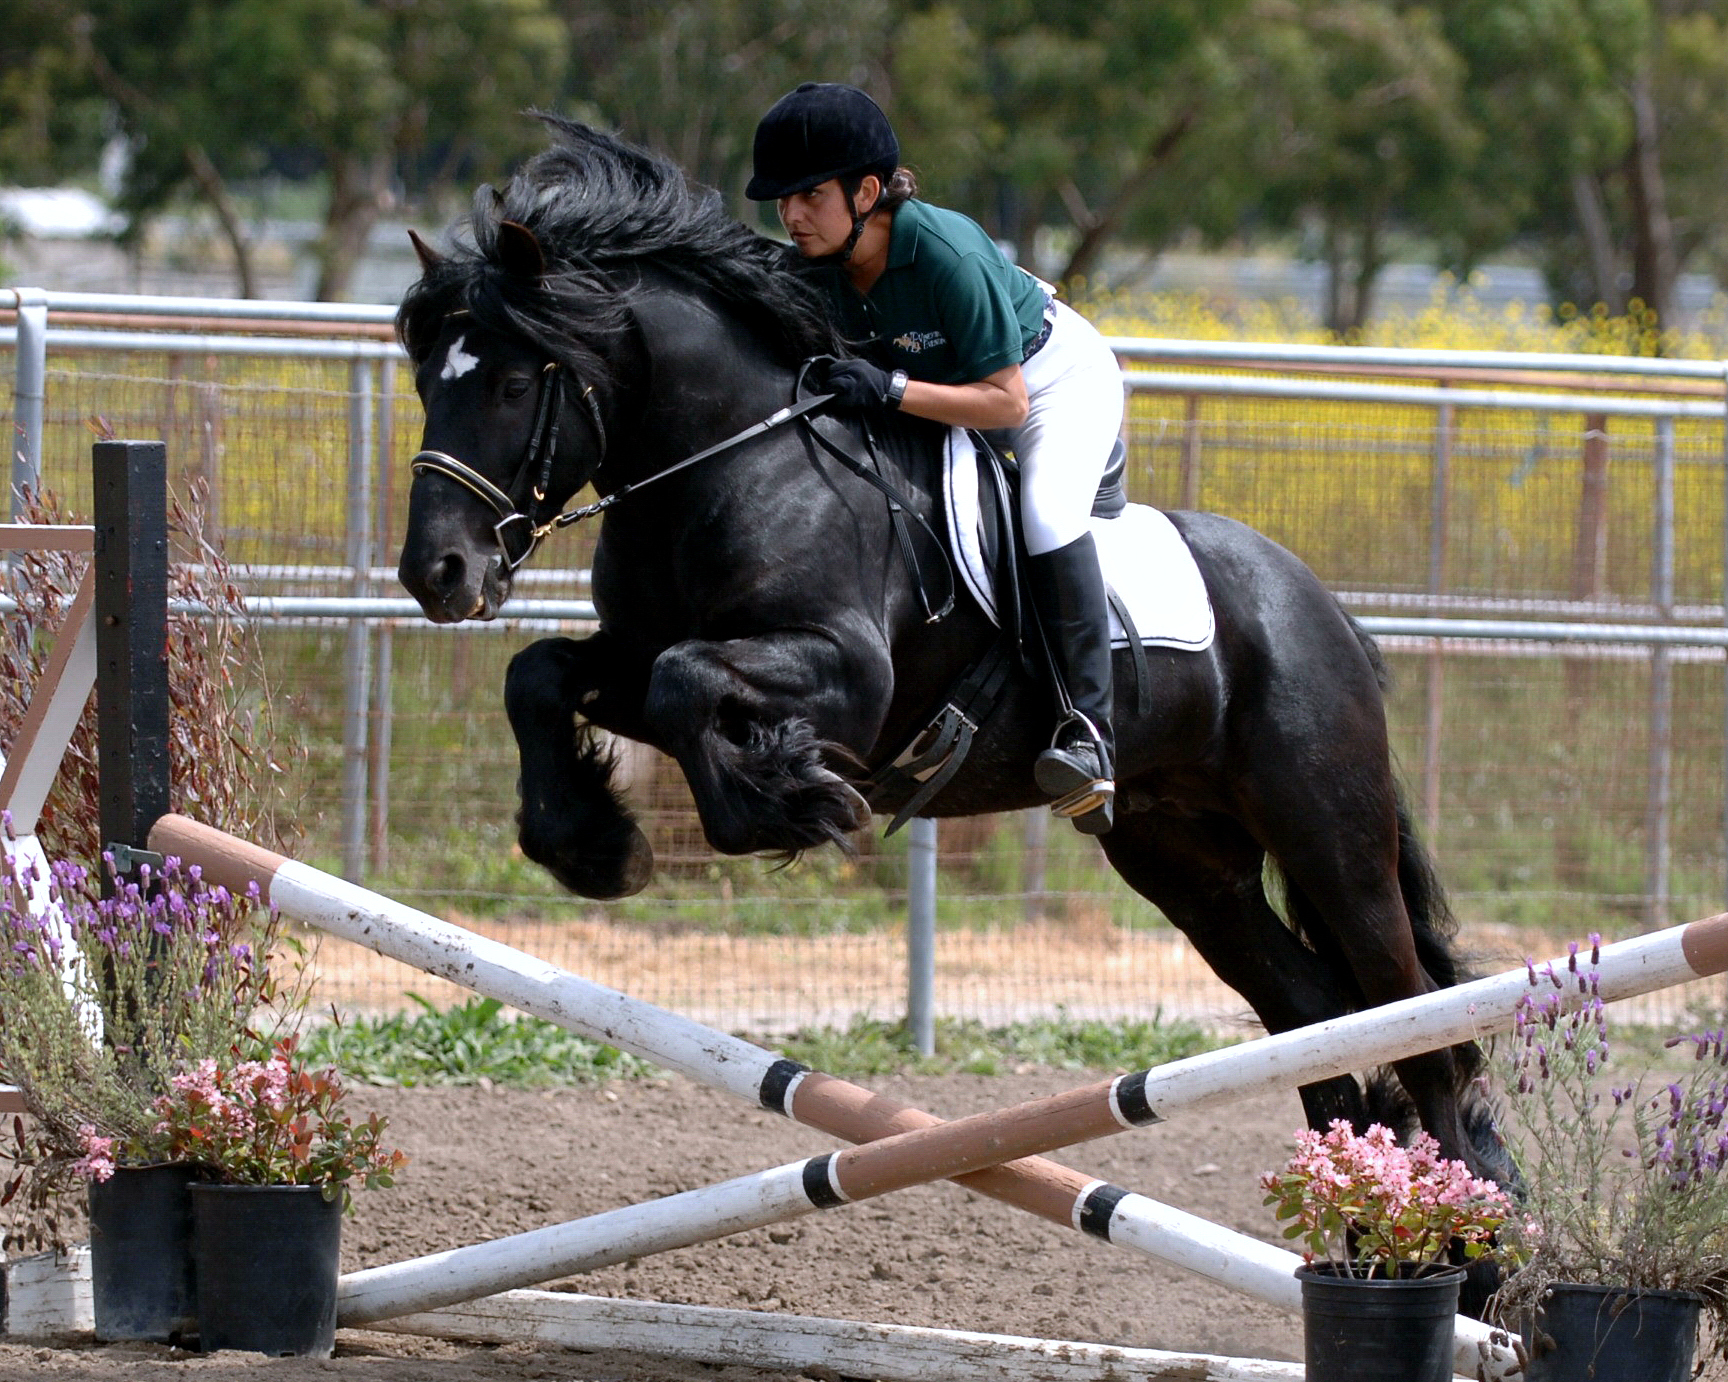 Colliery Alick at his first show, in 2005 – 35 days under saddle!